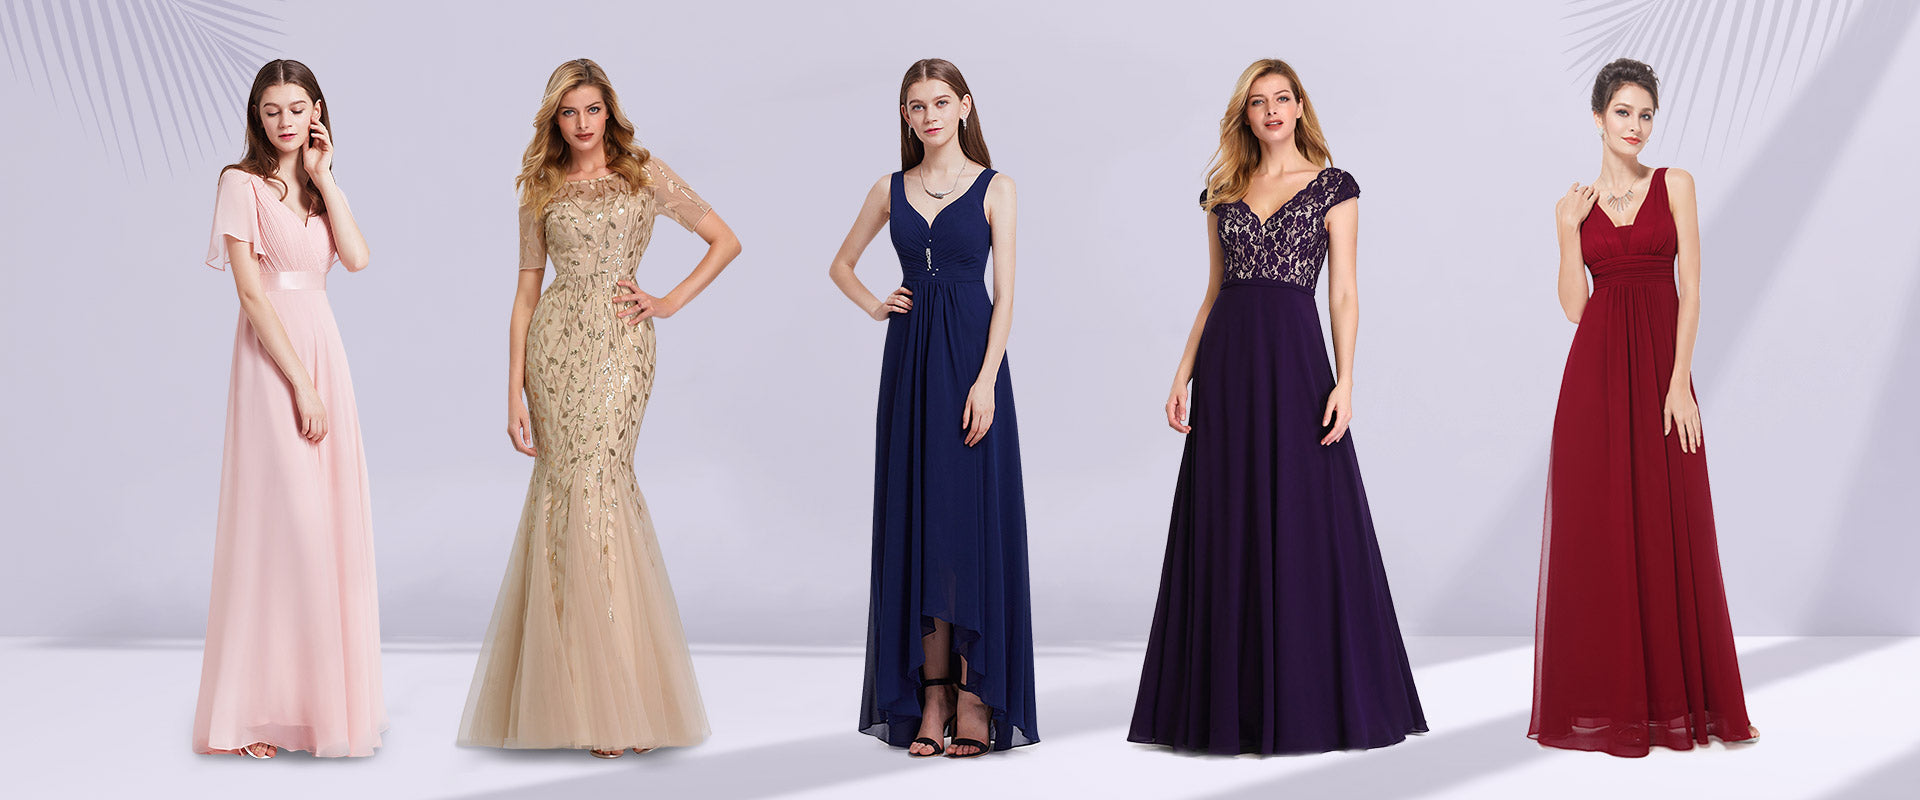 Our Favorite Plus Size Prom Dresses 2020